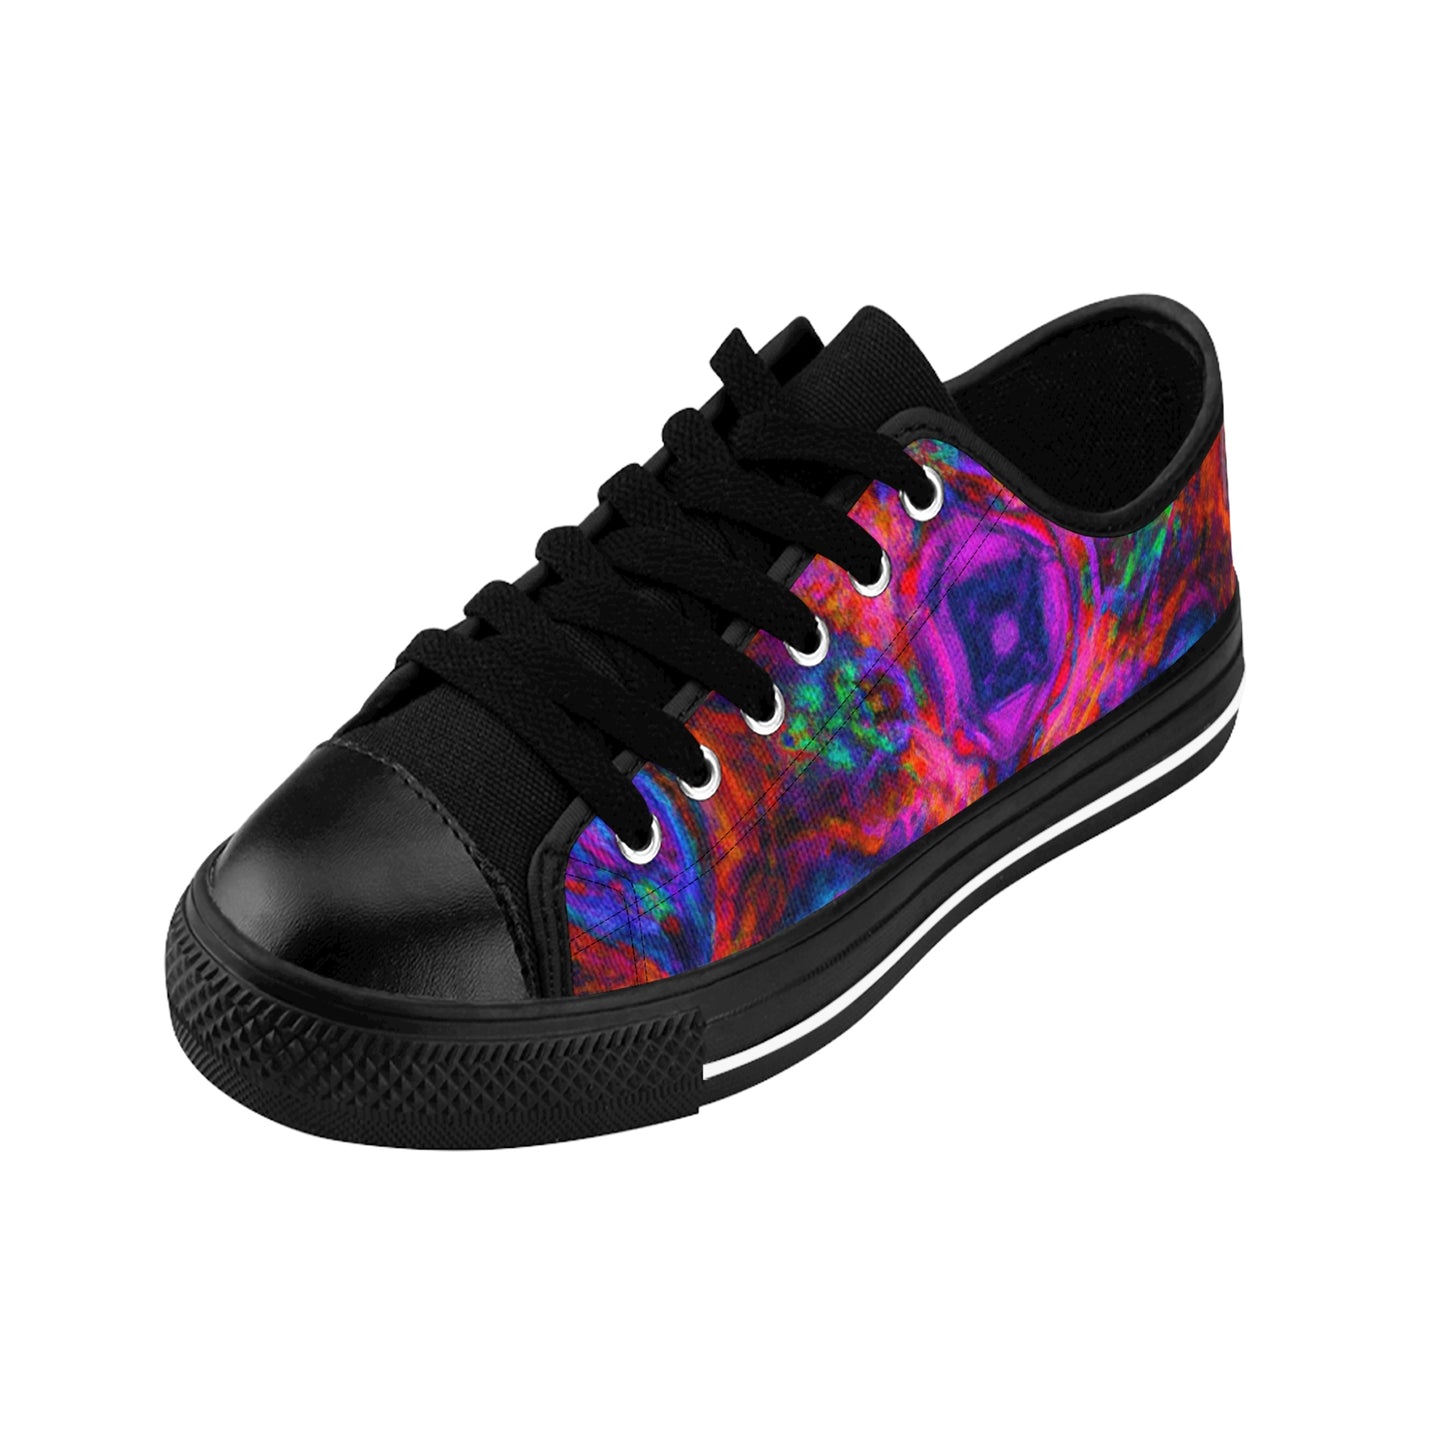 Sir Phineas Cobbinsworth - Psychedelic Low Top